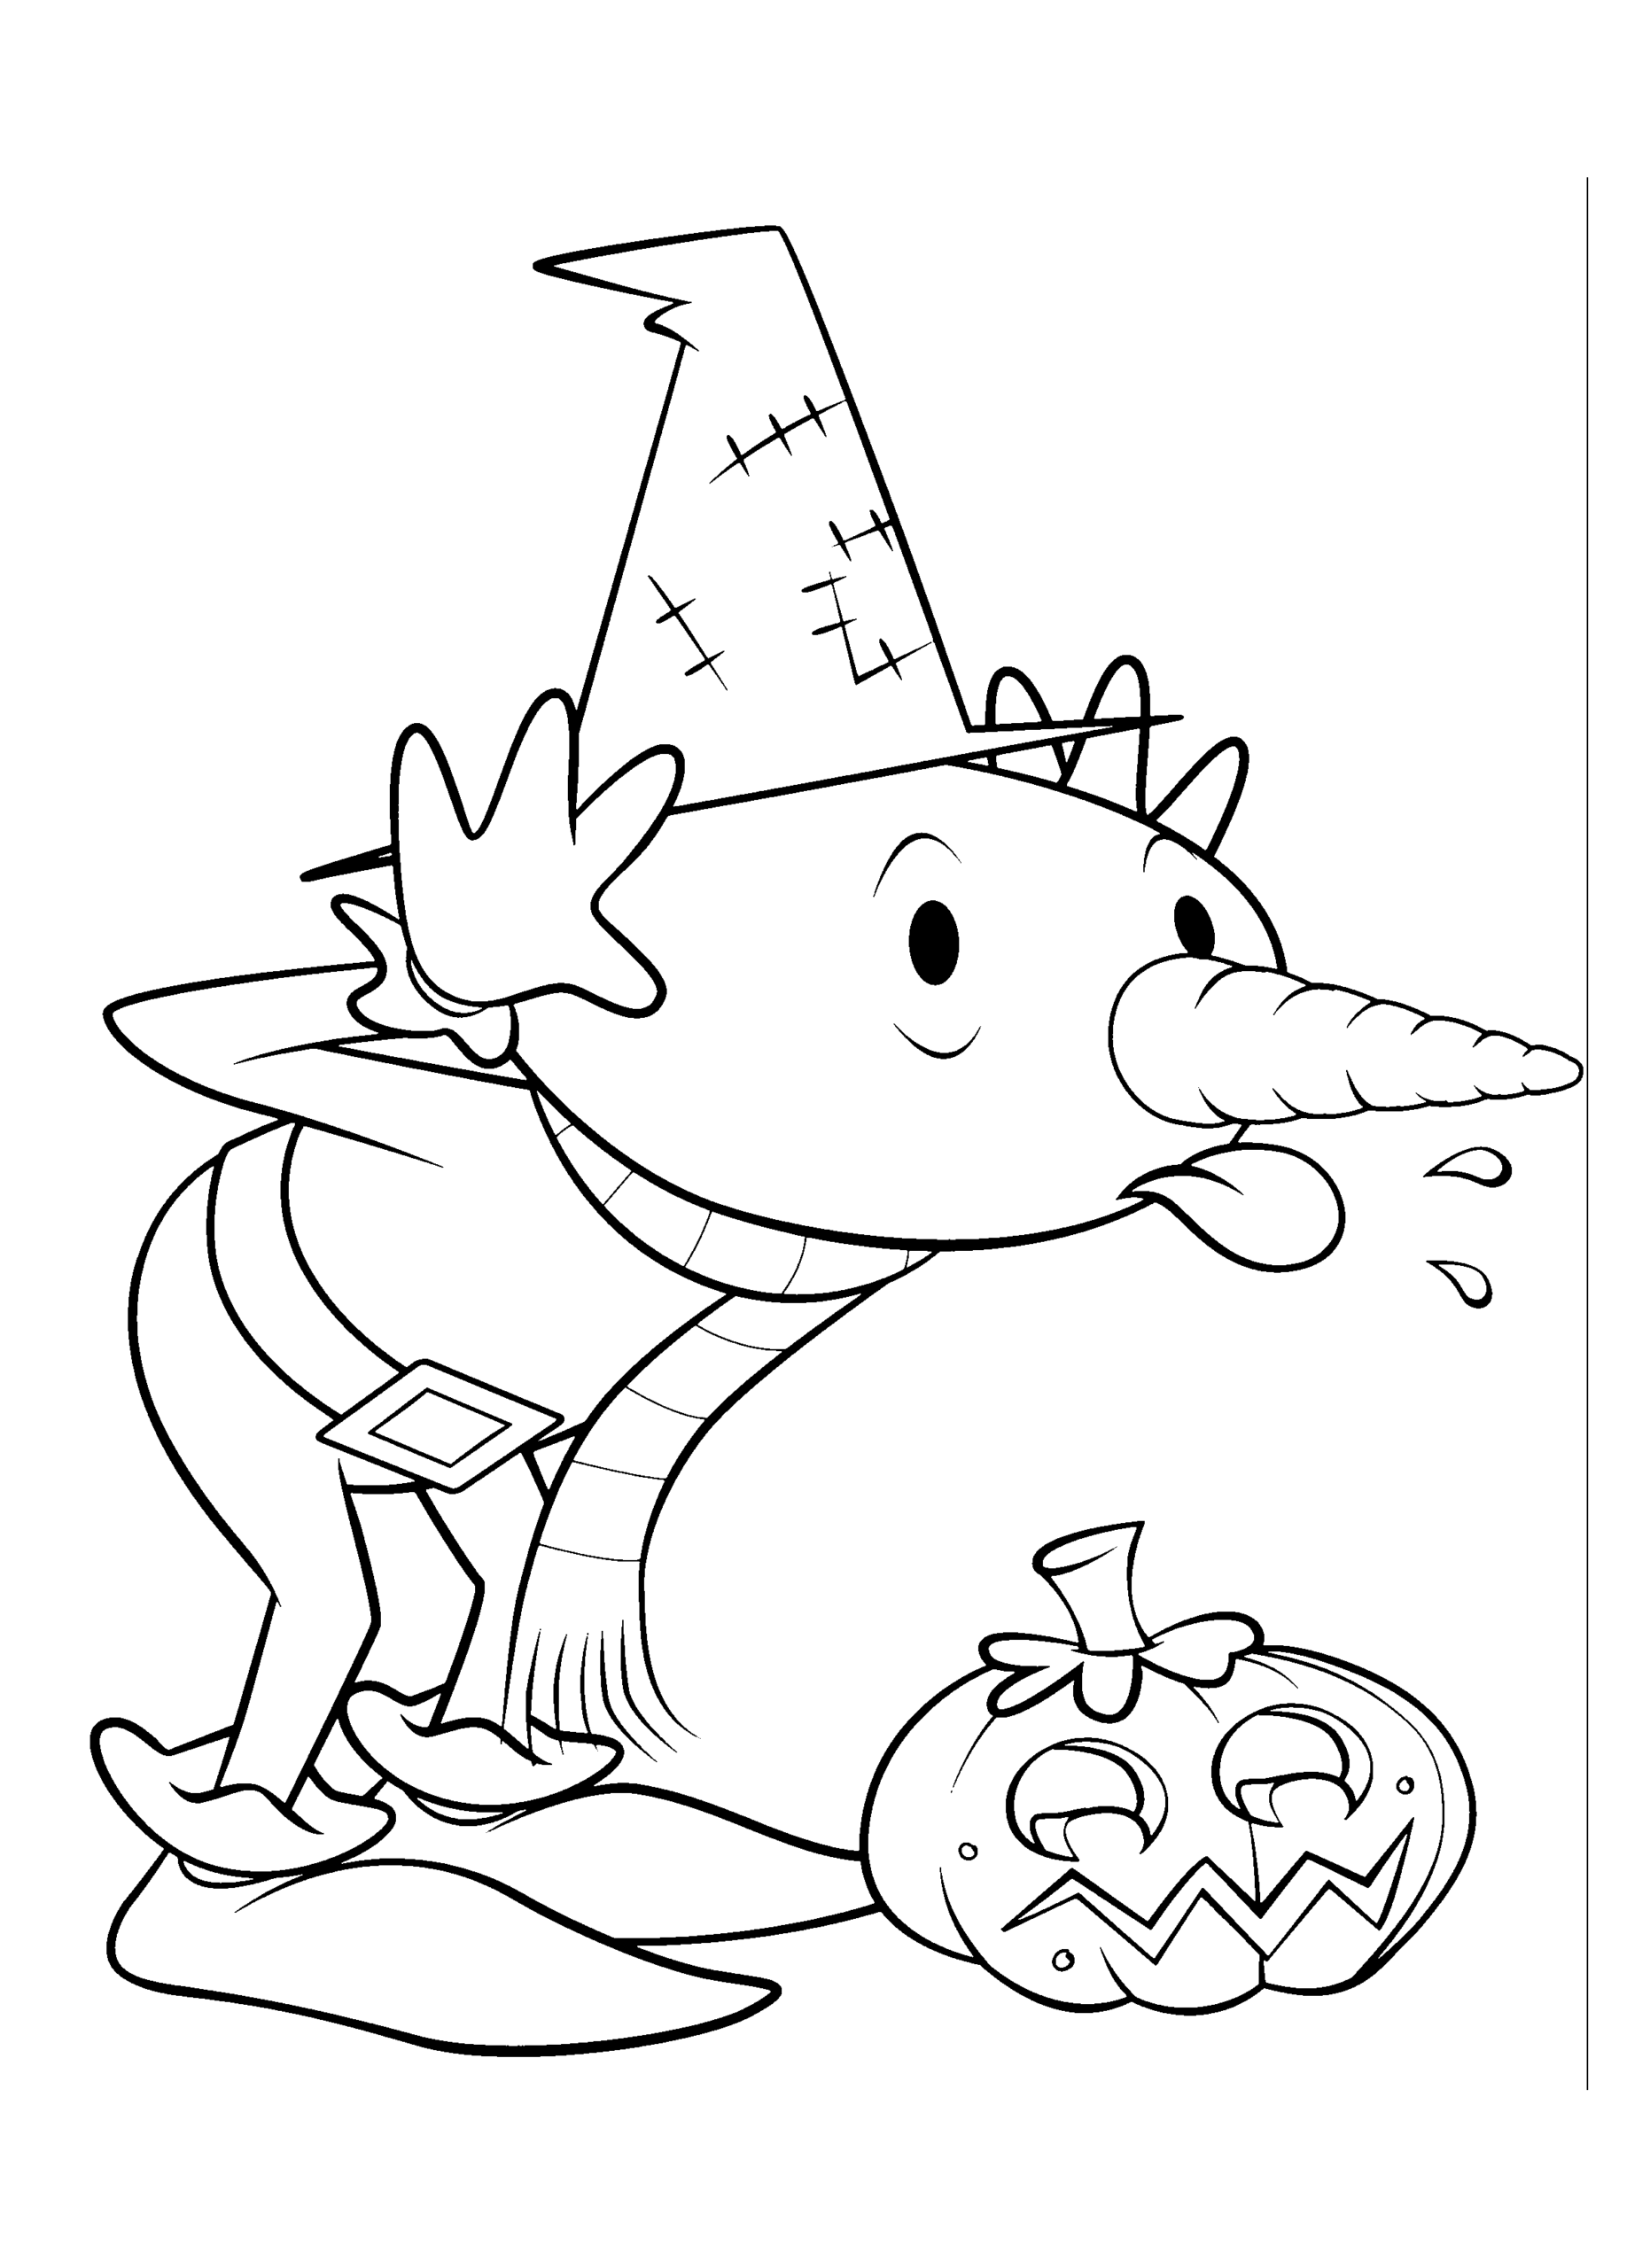 Bob the Builder Coloring Pages TV Film bob the builder 35 Printable 2020 01054 Coloring4free